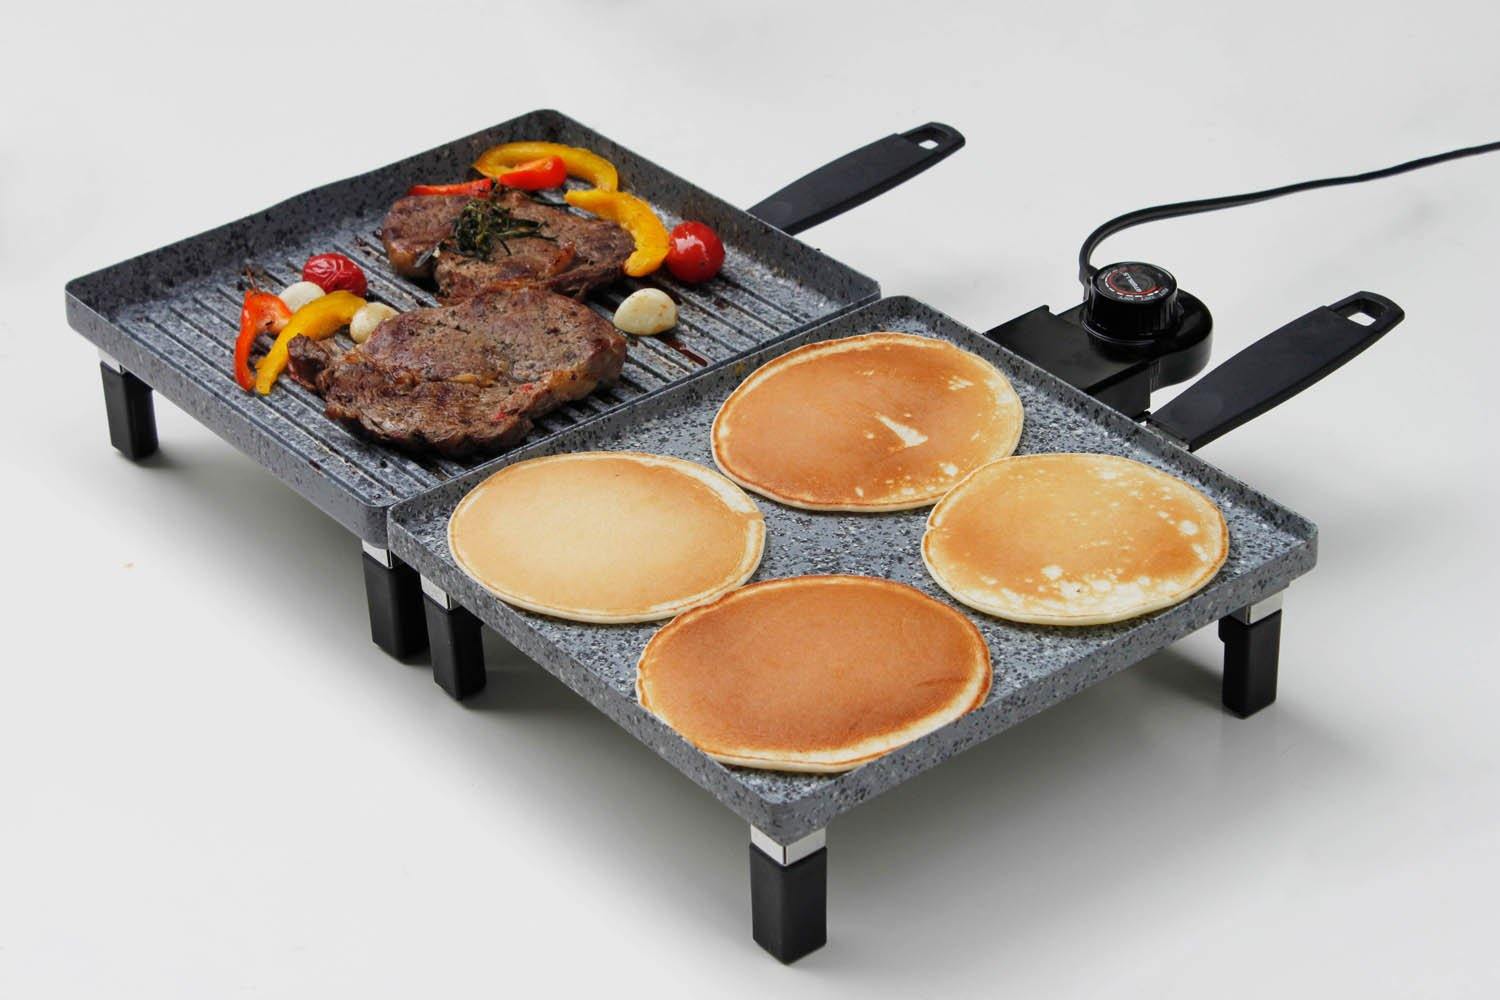 Steaks and pancakes on Atgrills electric griddle grill combo